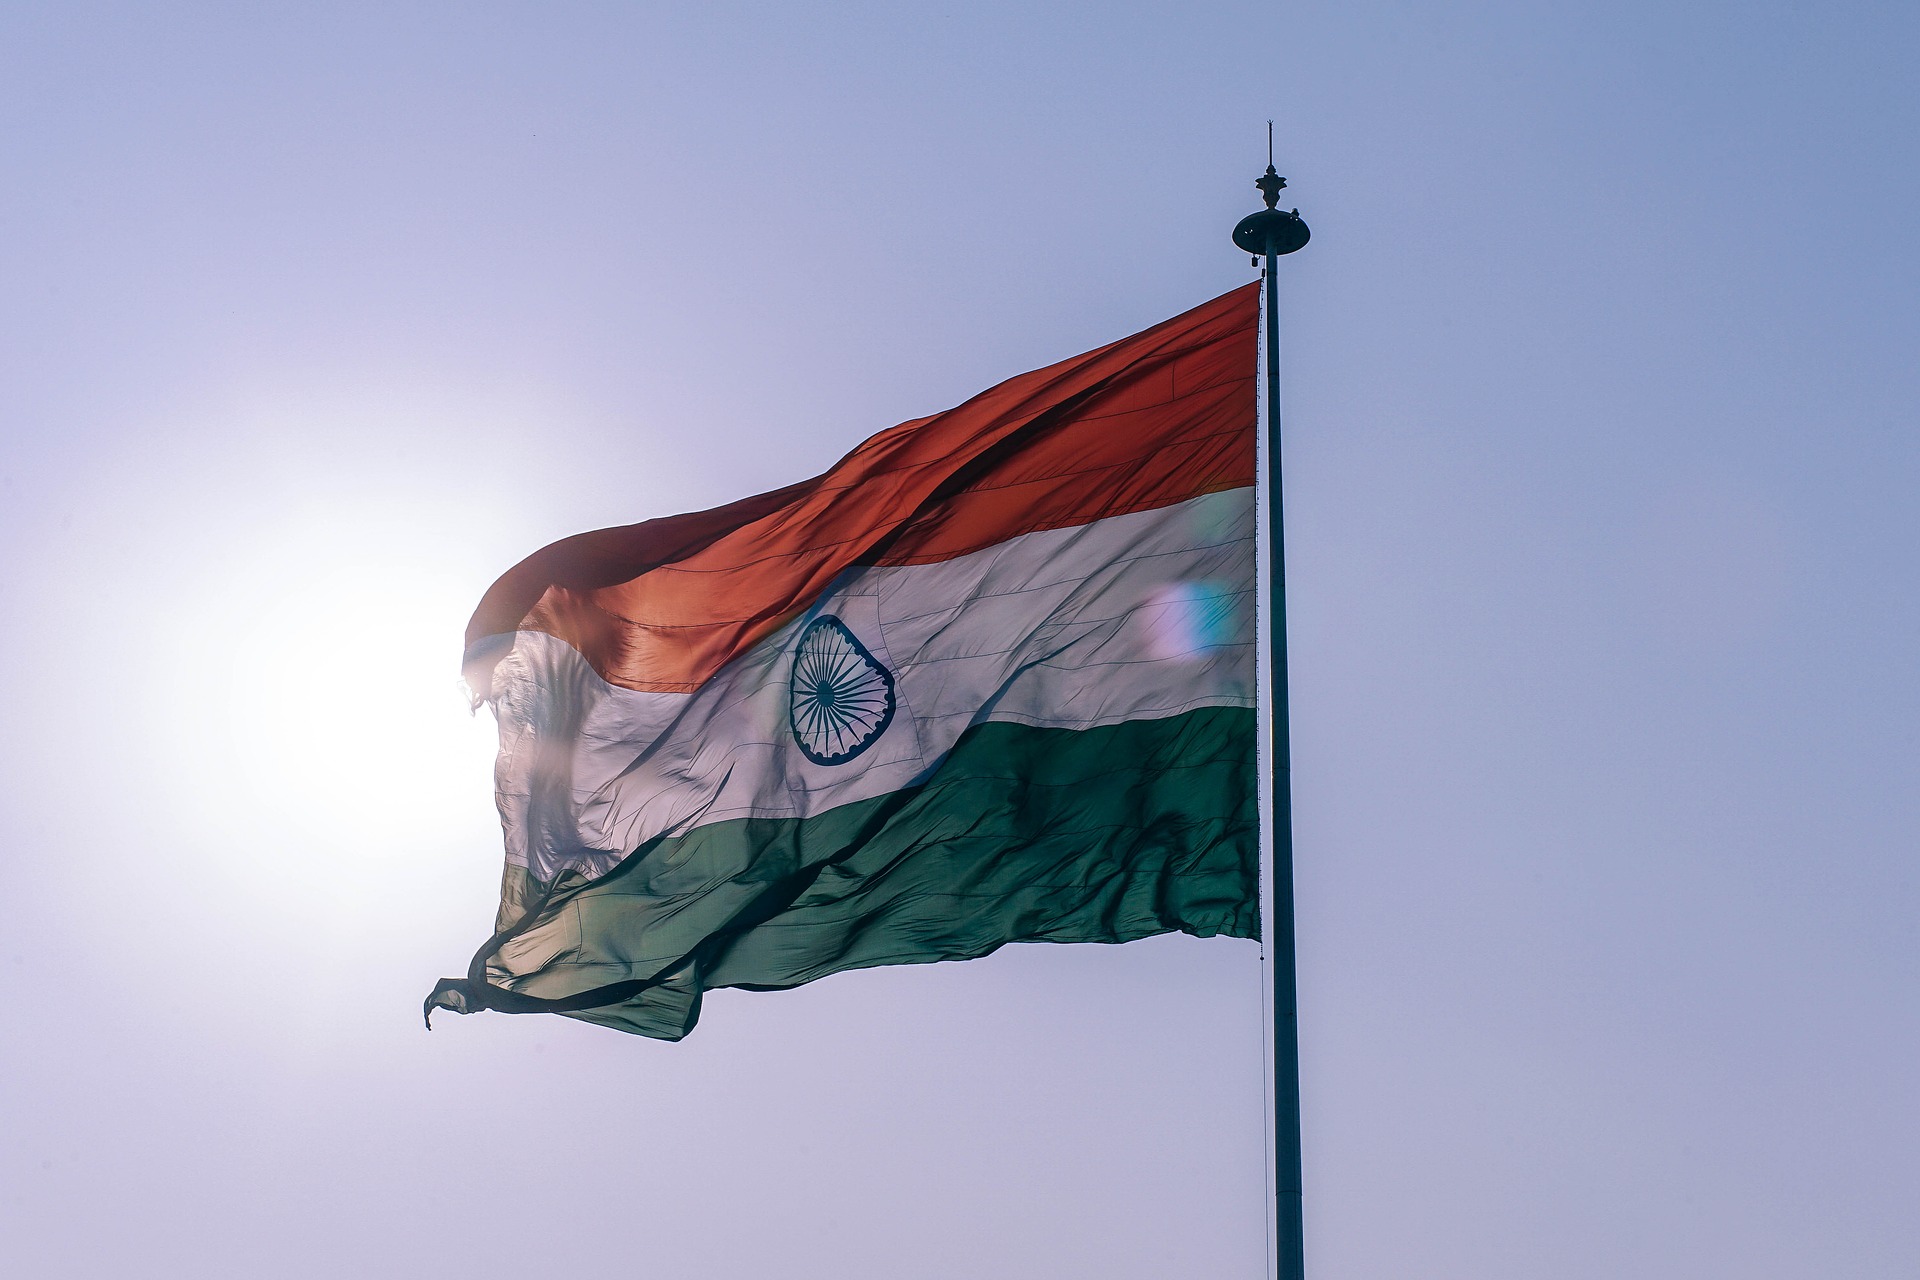 The flag of India (Photo credit: Flickr)